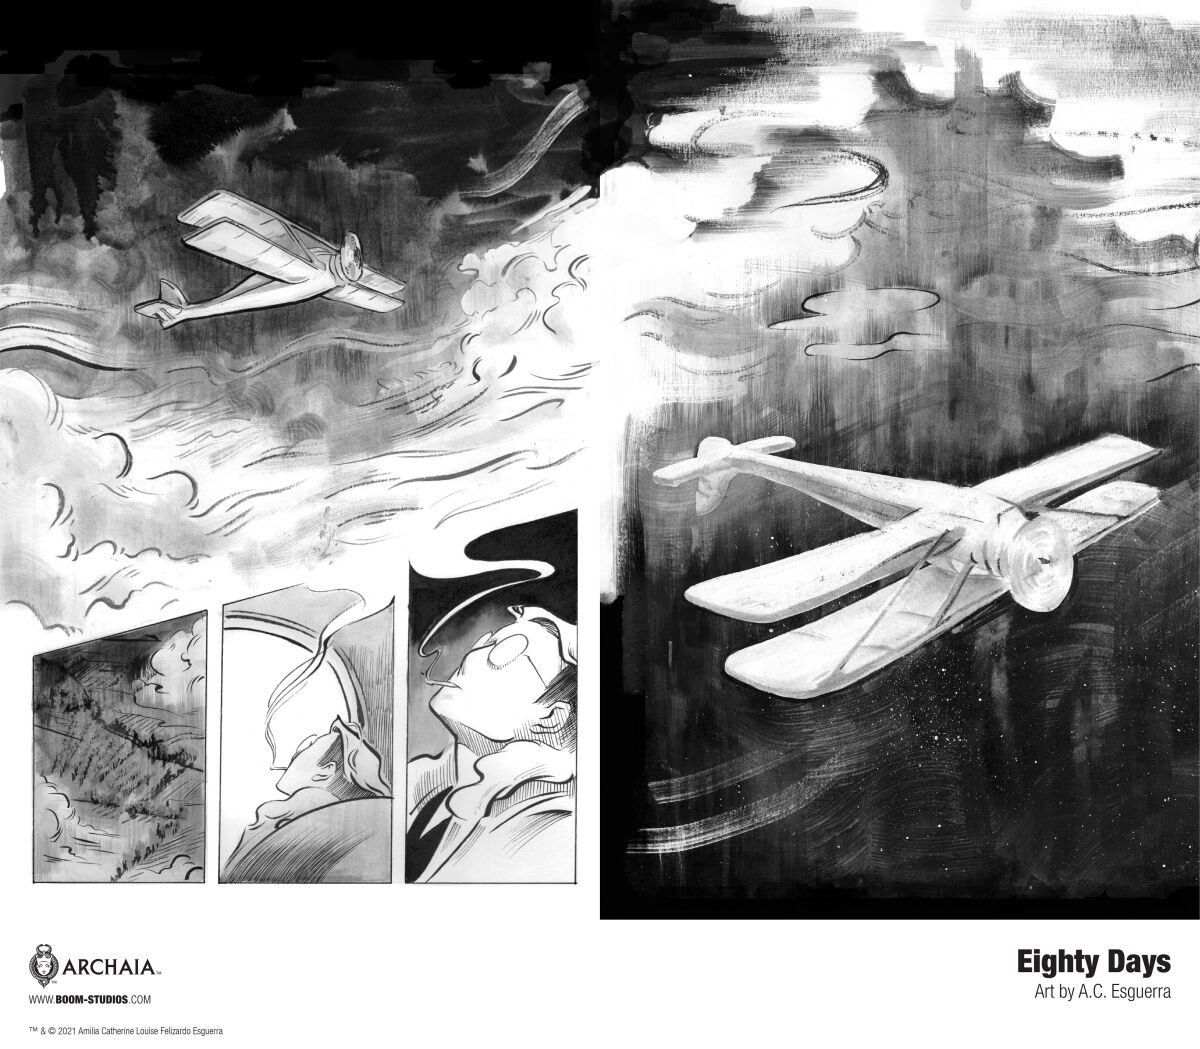 Comic book page with a plane flying